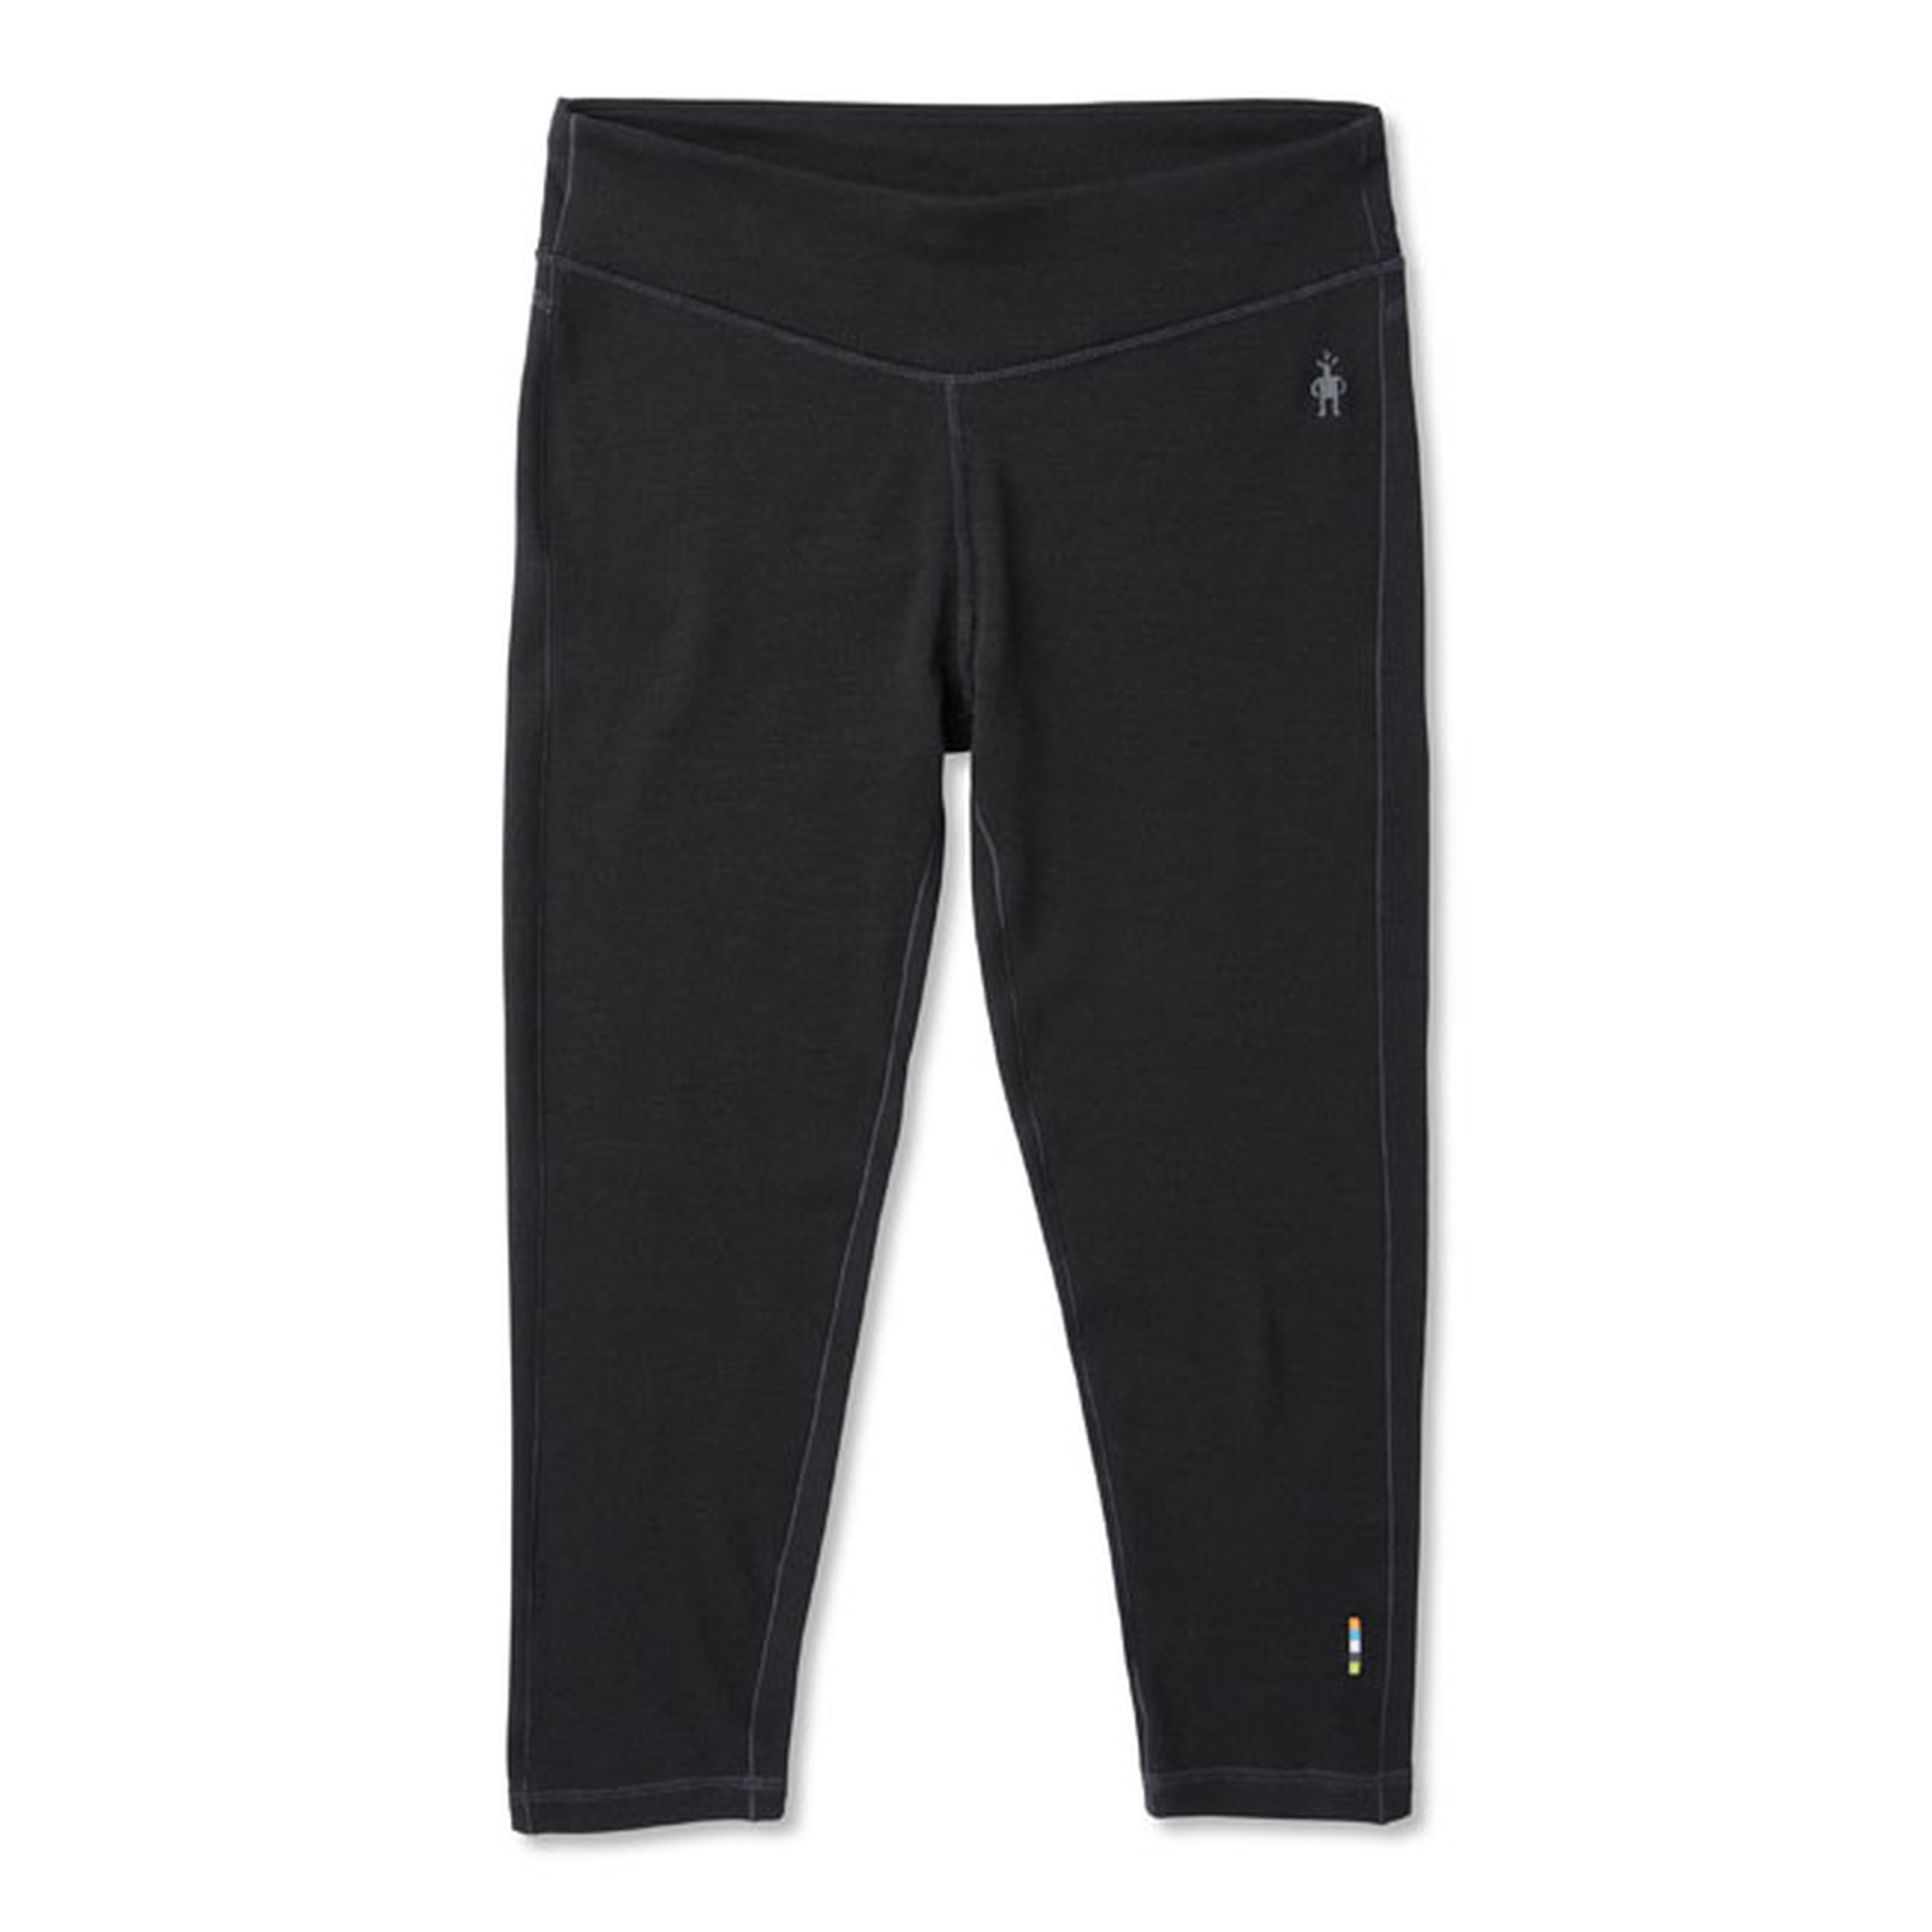 Smartwool Classic Thermal Merino Base Layer 3/4 Bottom Boxed